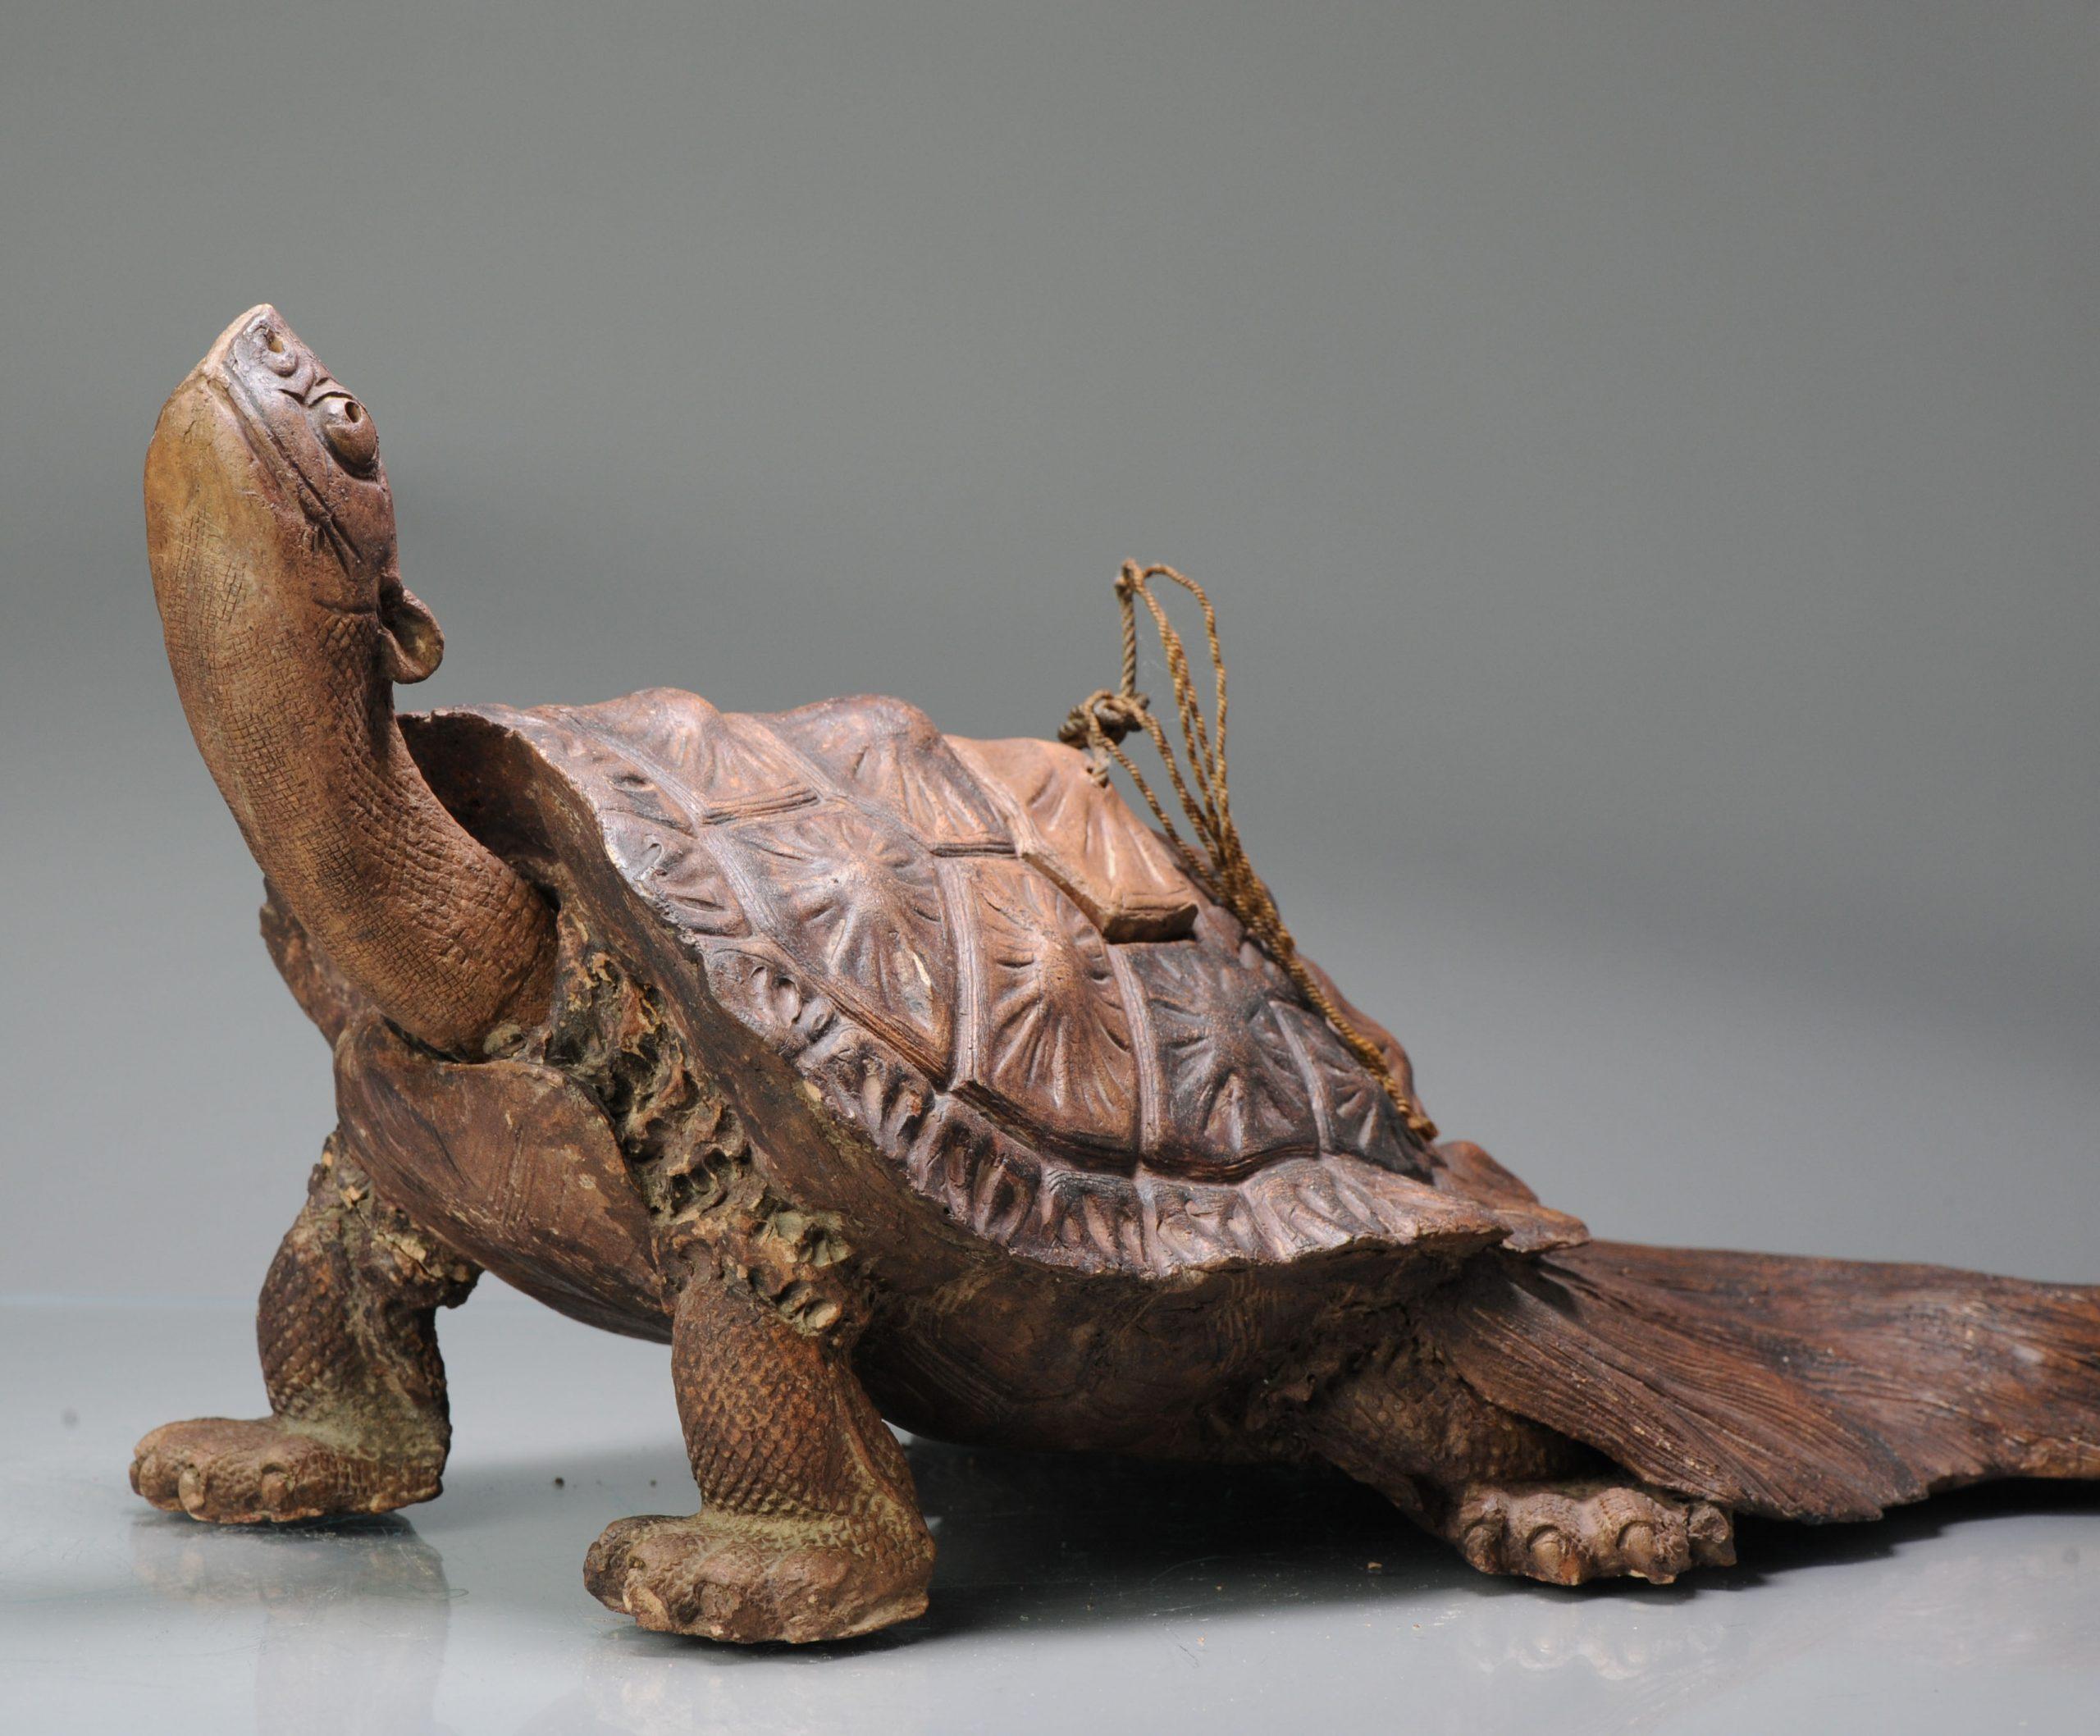 Nicely made and large incense burner or Okimono of a turtle. In earthenware with nice patina. Shimane Prefecture Iwayaki (Nagahama Yaki) Turtle figurine. The head and part of the back can be removed.

Okimono (??, oki-mono) is a Japanese term